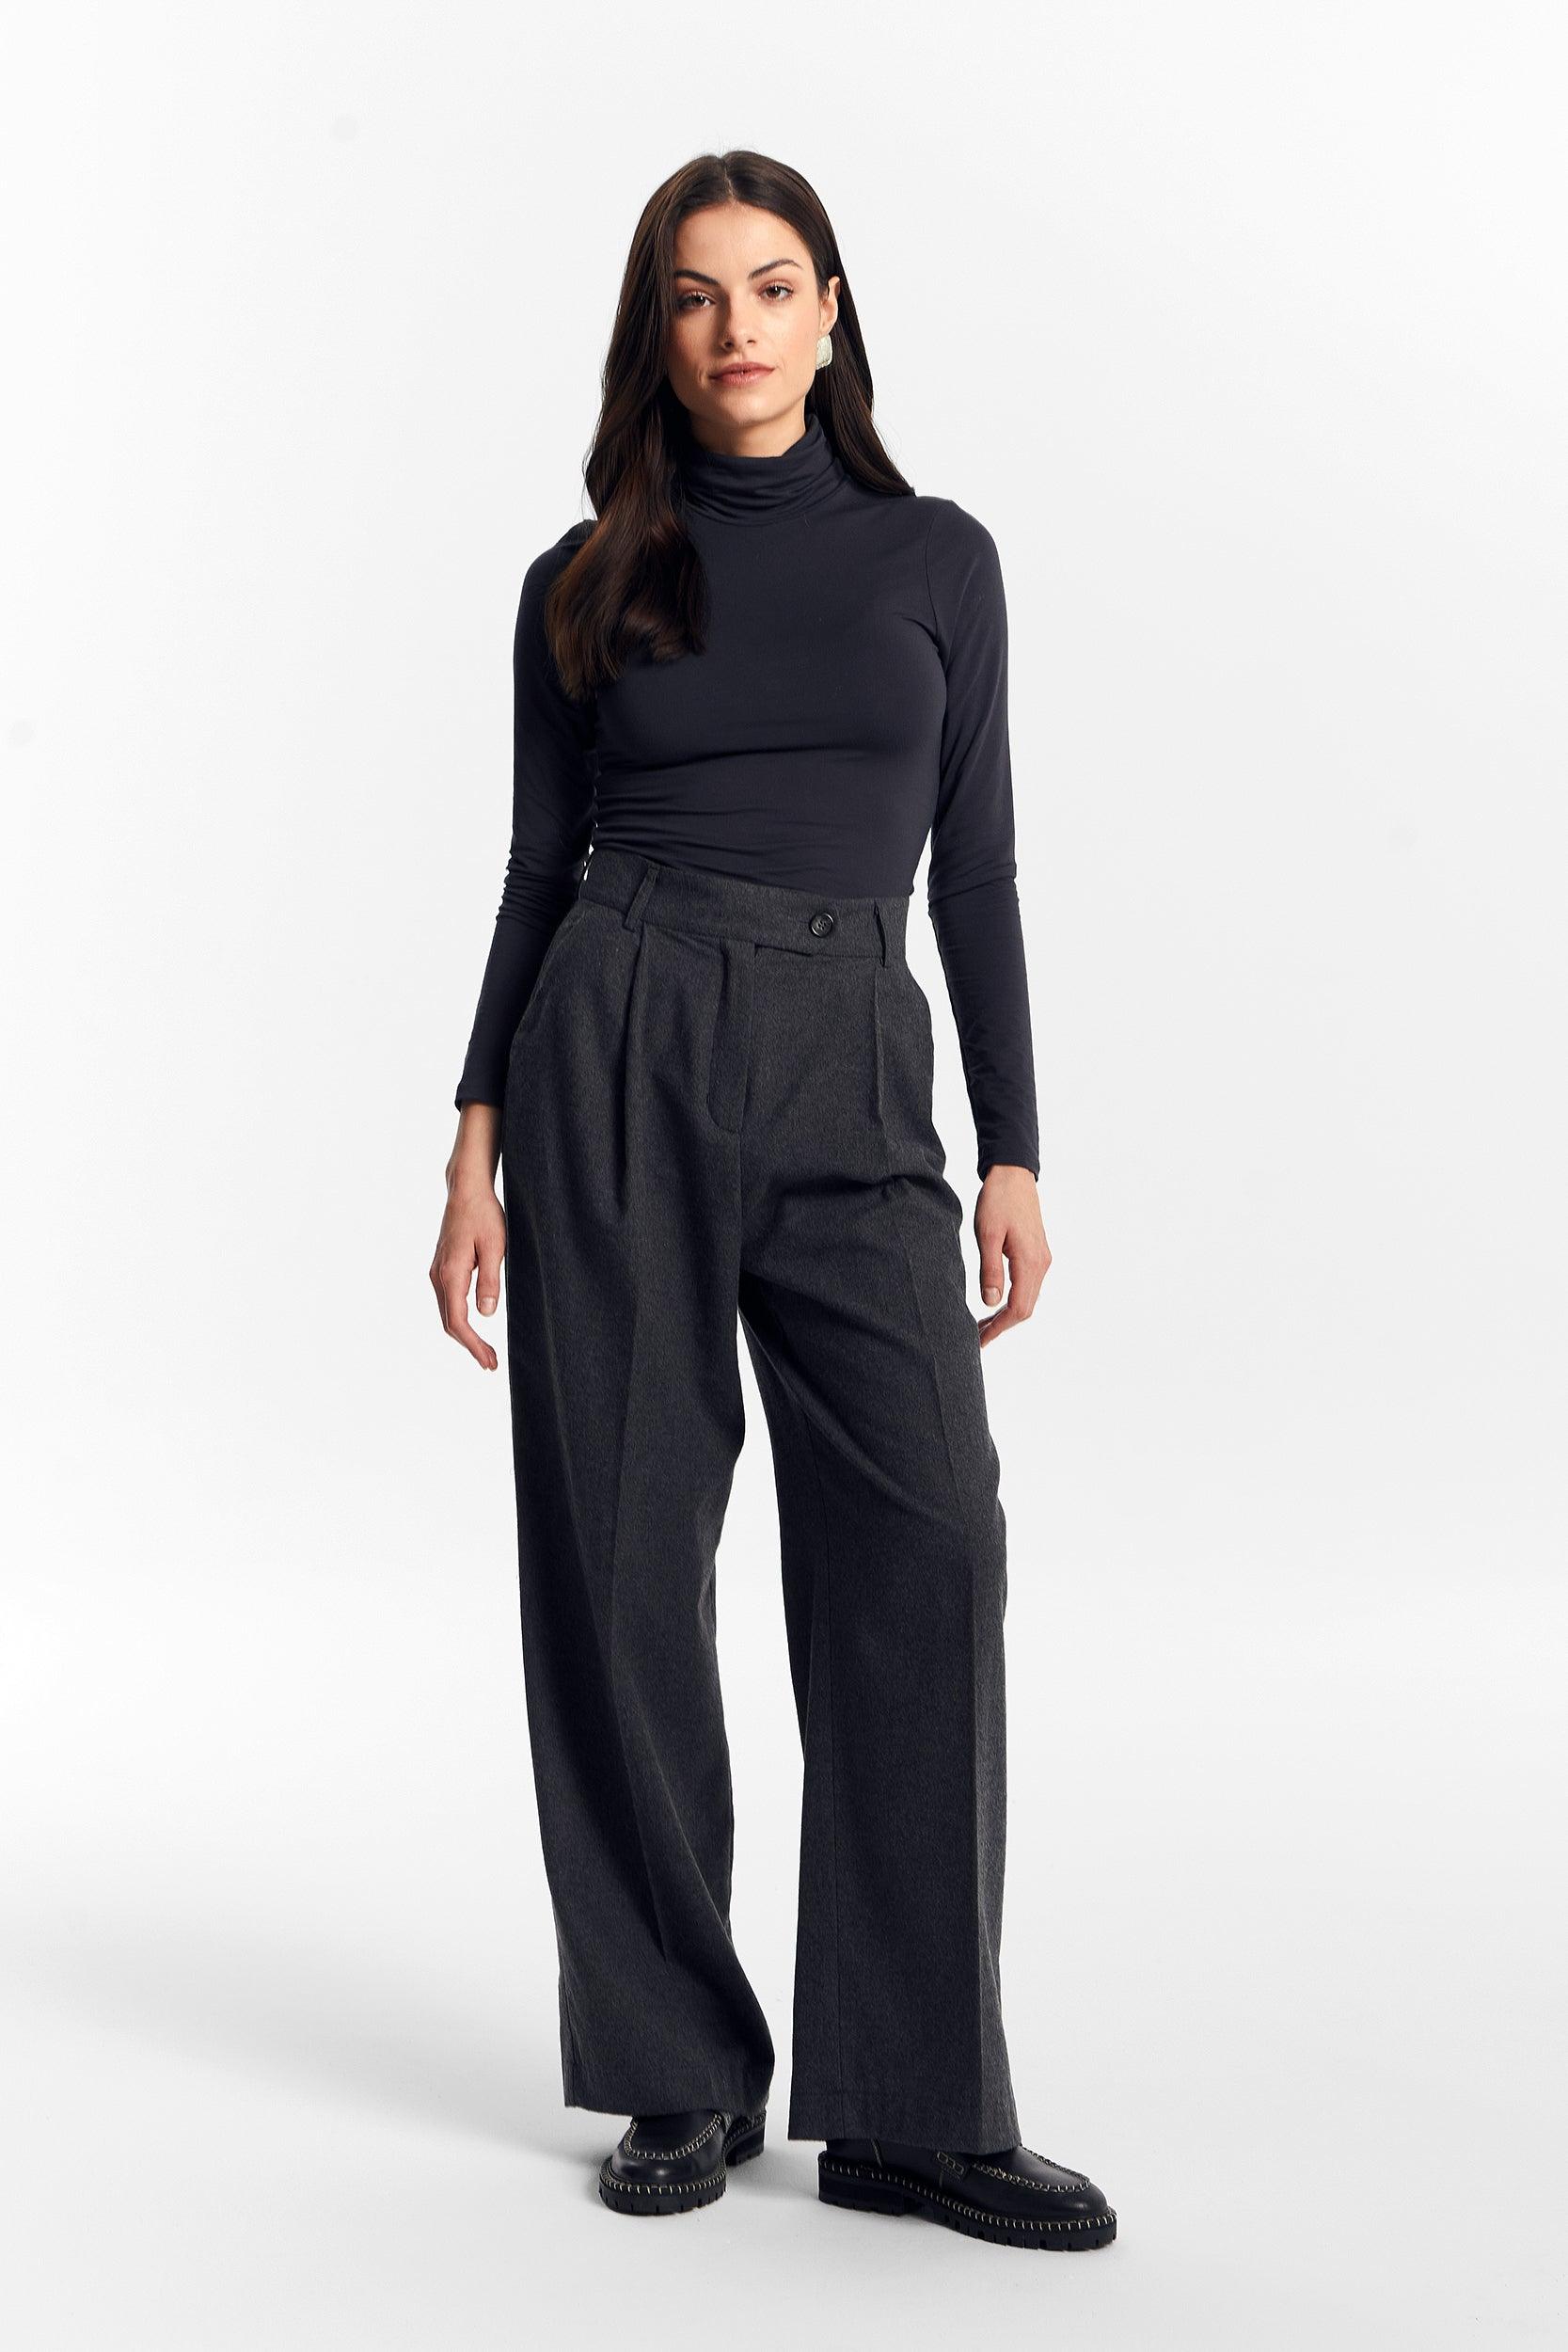 Modest Graphite trousers